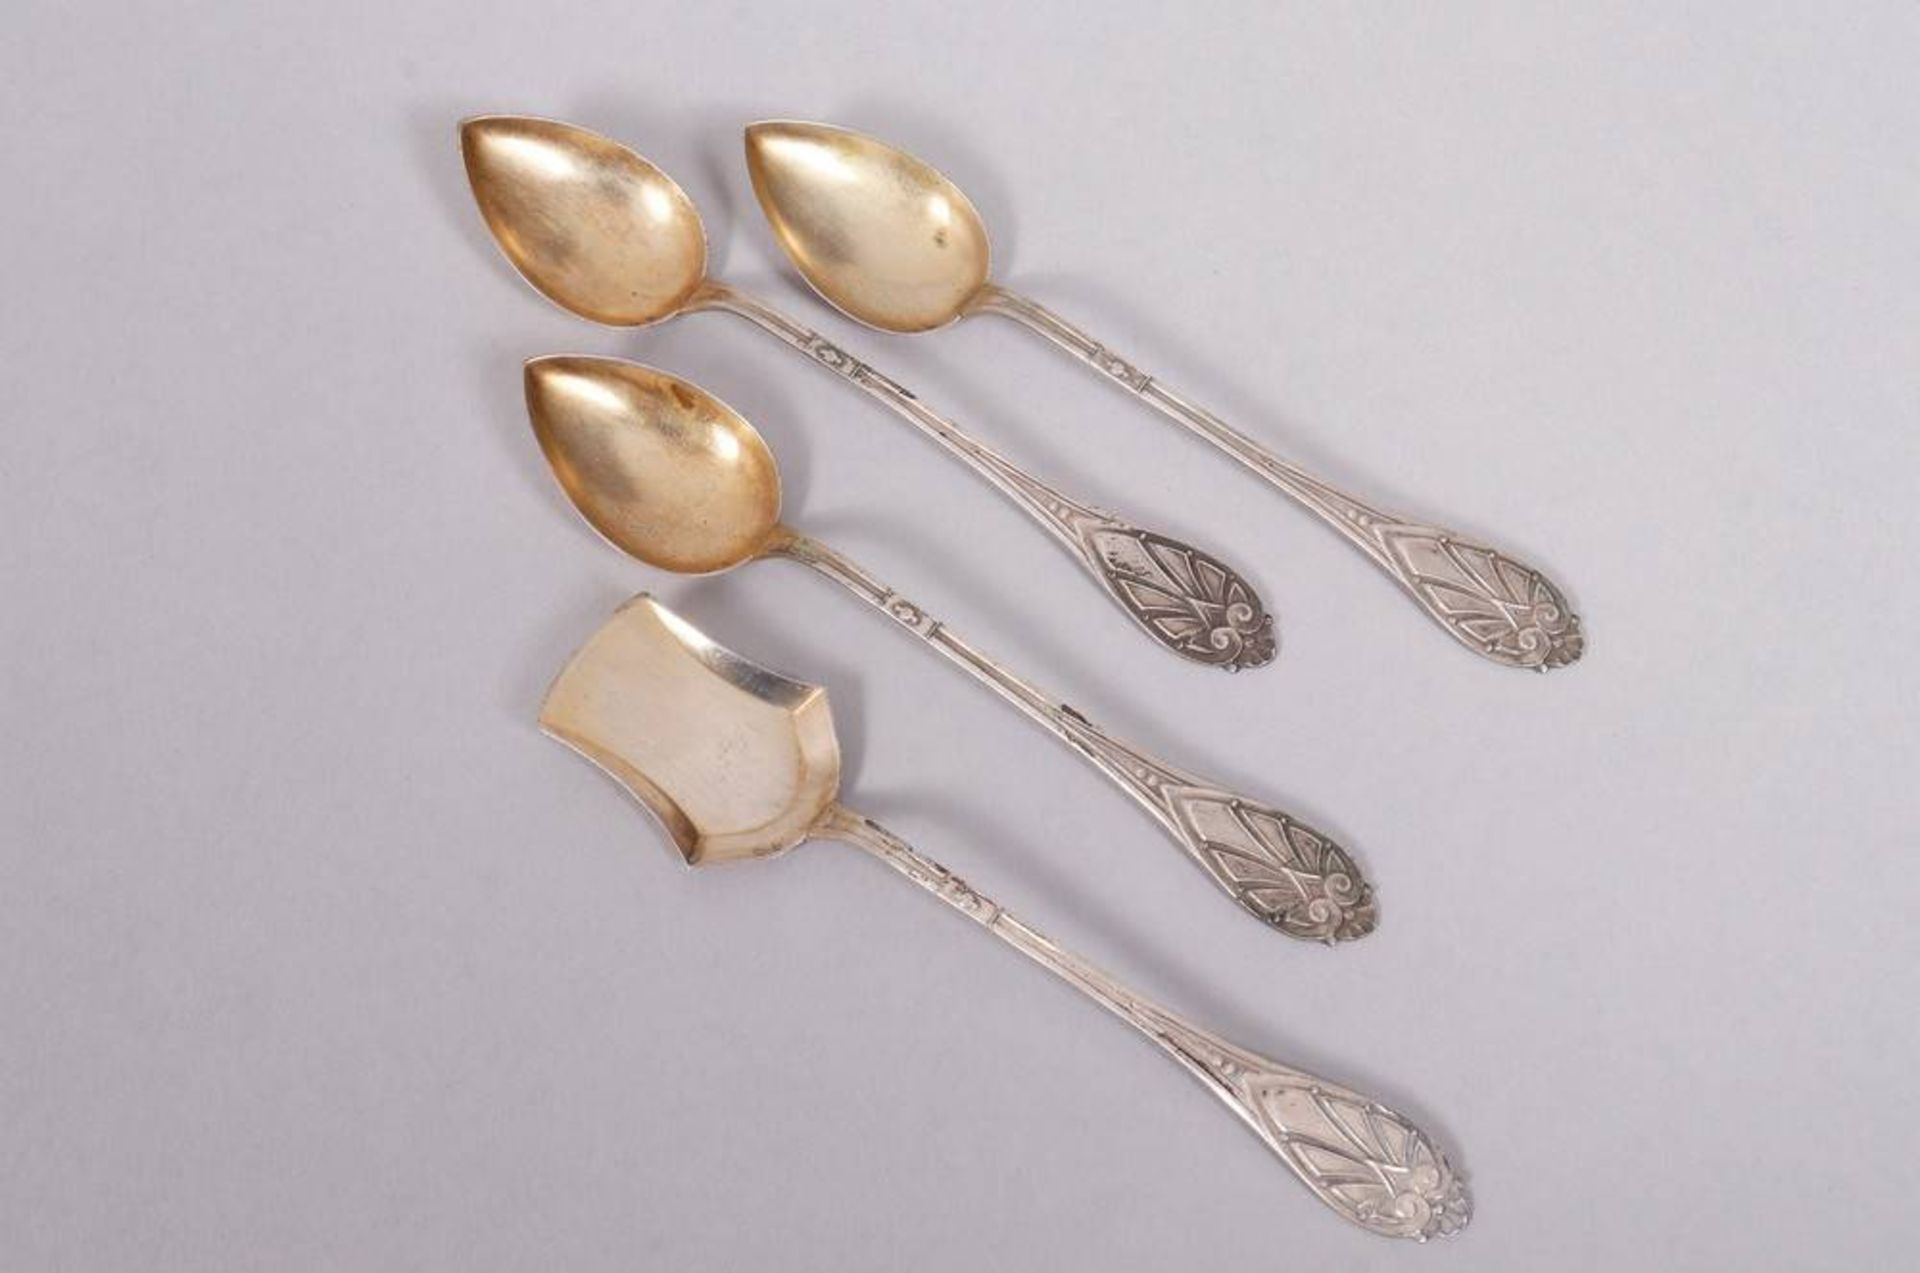 Set of grapefruit spoons in box, silver, France, c. 1900 - Image 2 of 5